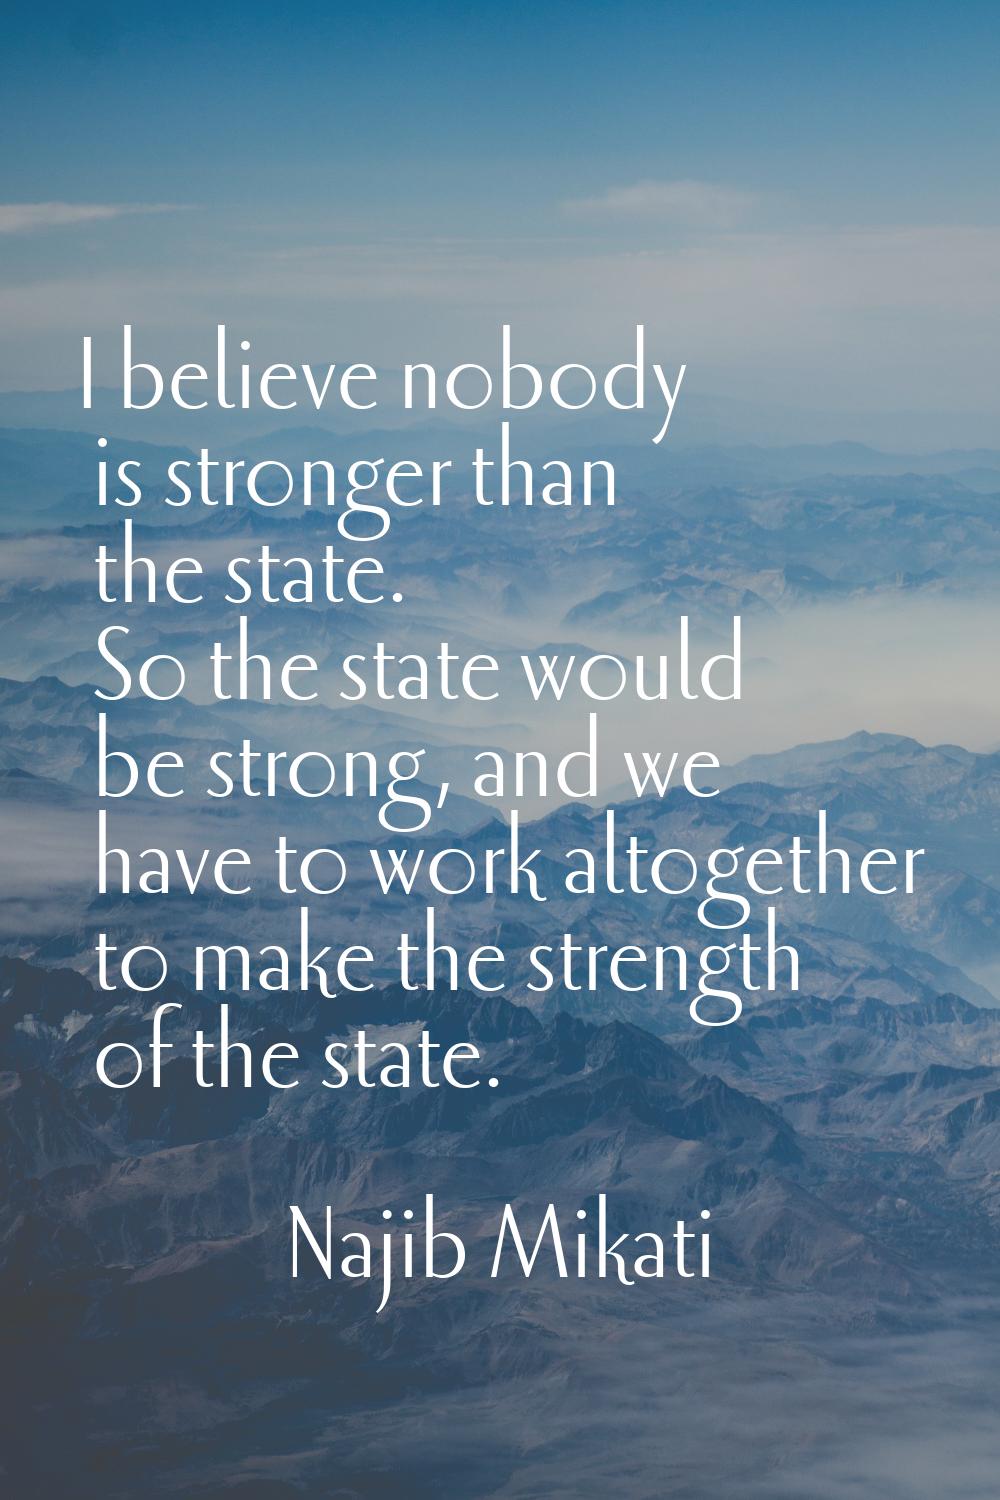 I believe nobody is stronger than the state. So the state would be strong, and we have to work alto